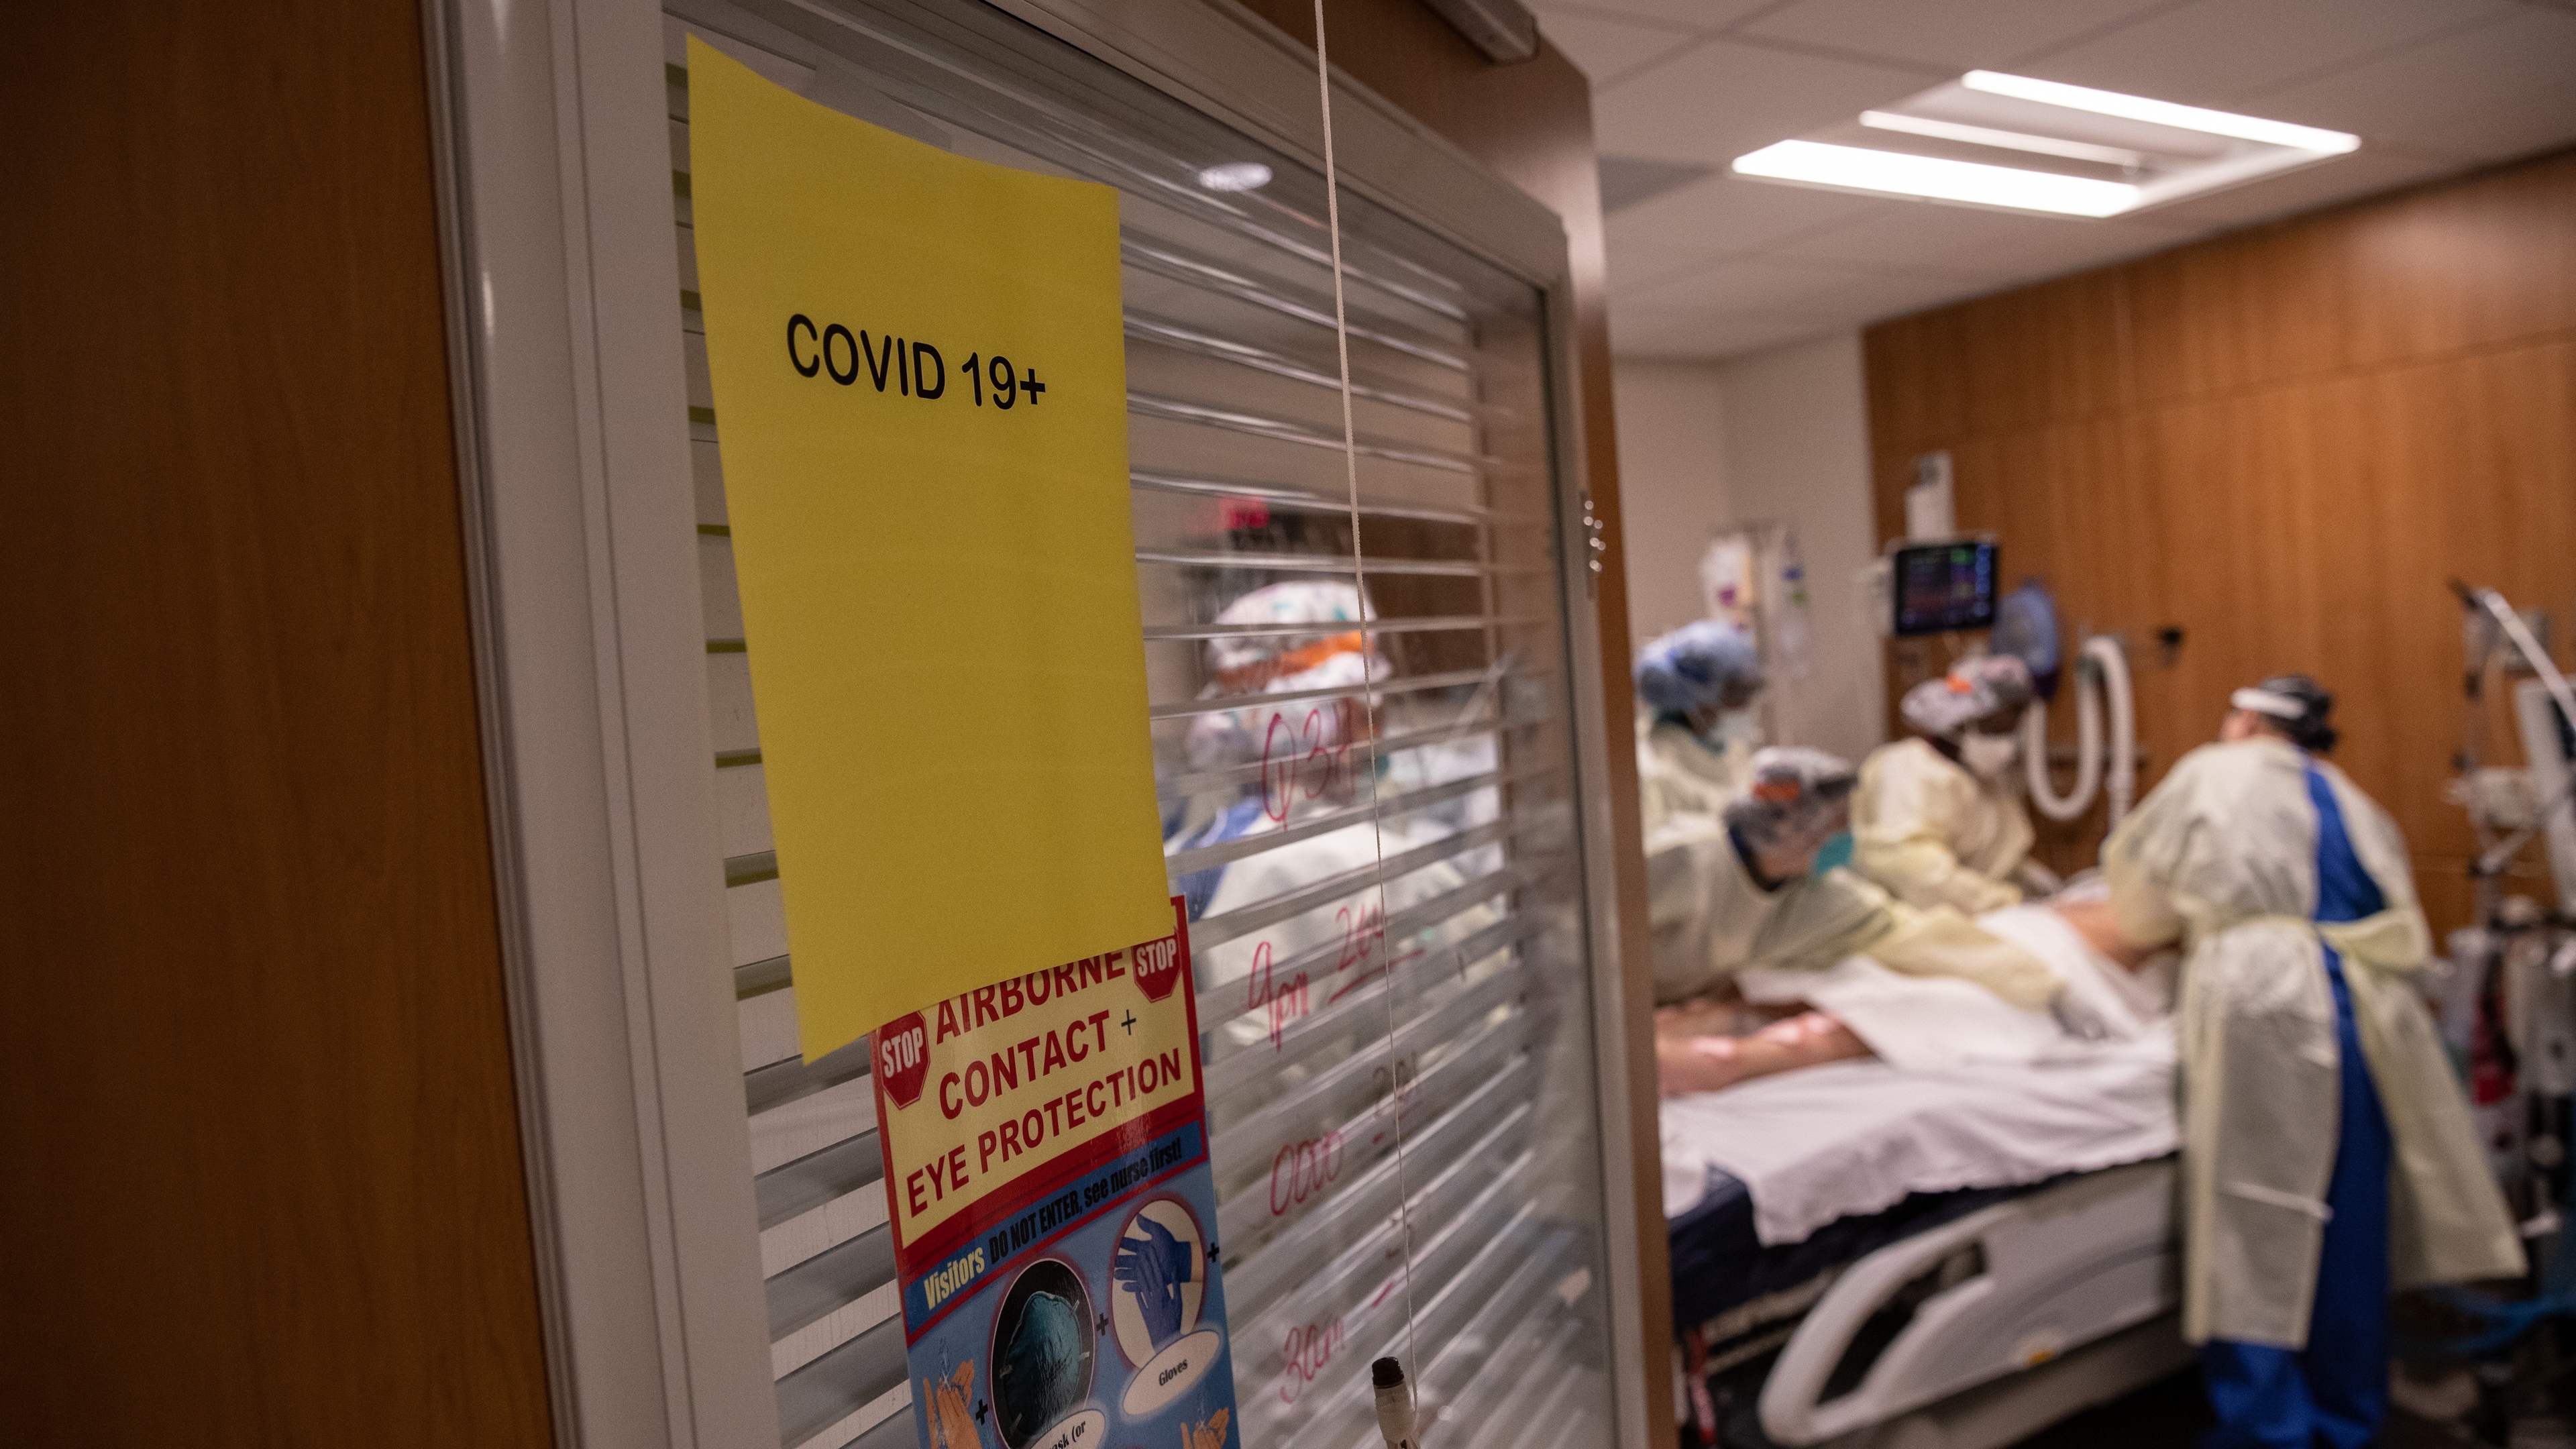 A "prone team," wearing personal protective equipment (PPE), prepares to turn a COVID-19 patient onto his stomach in a Stamford Hospital intensive care unit (ICU), on April 24, 2020 in Stamford, Connecticut.